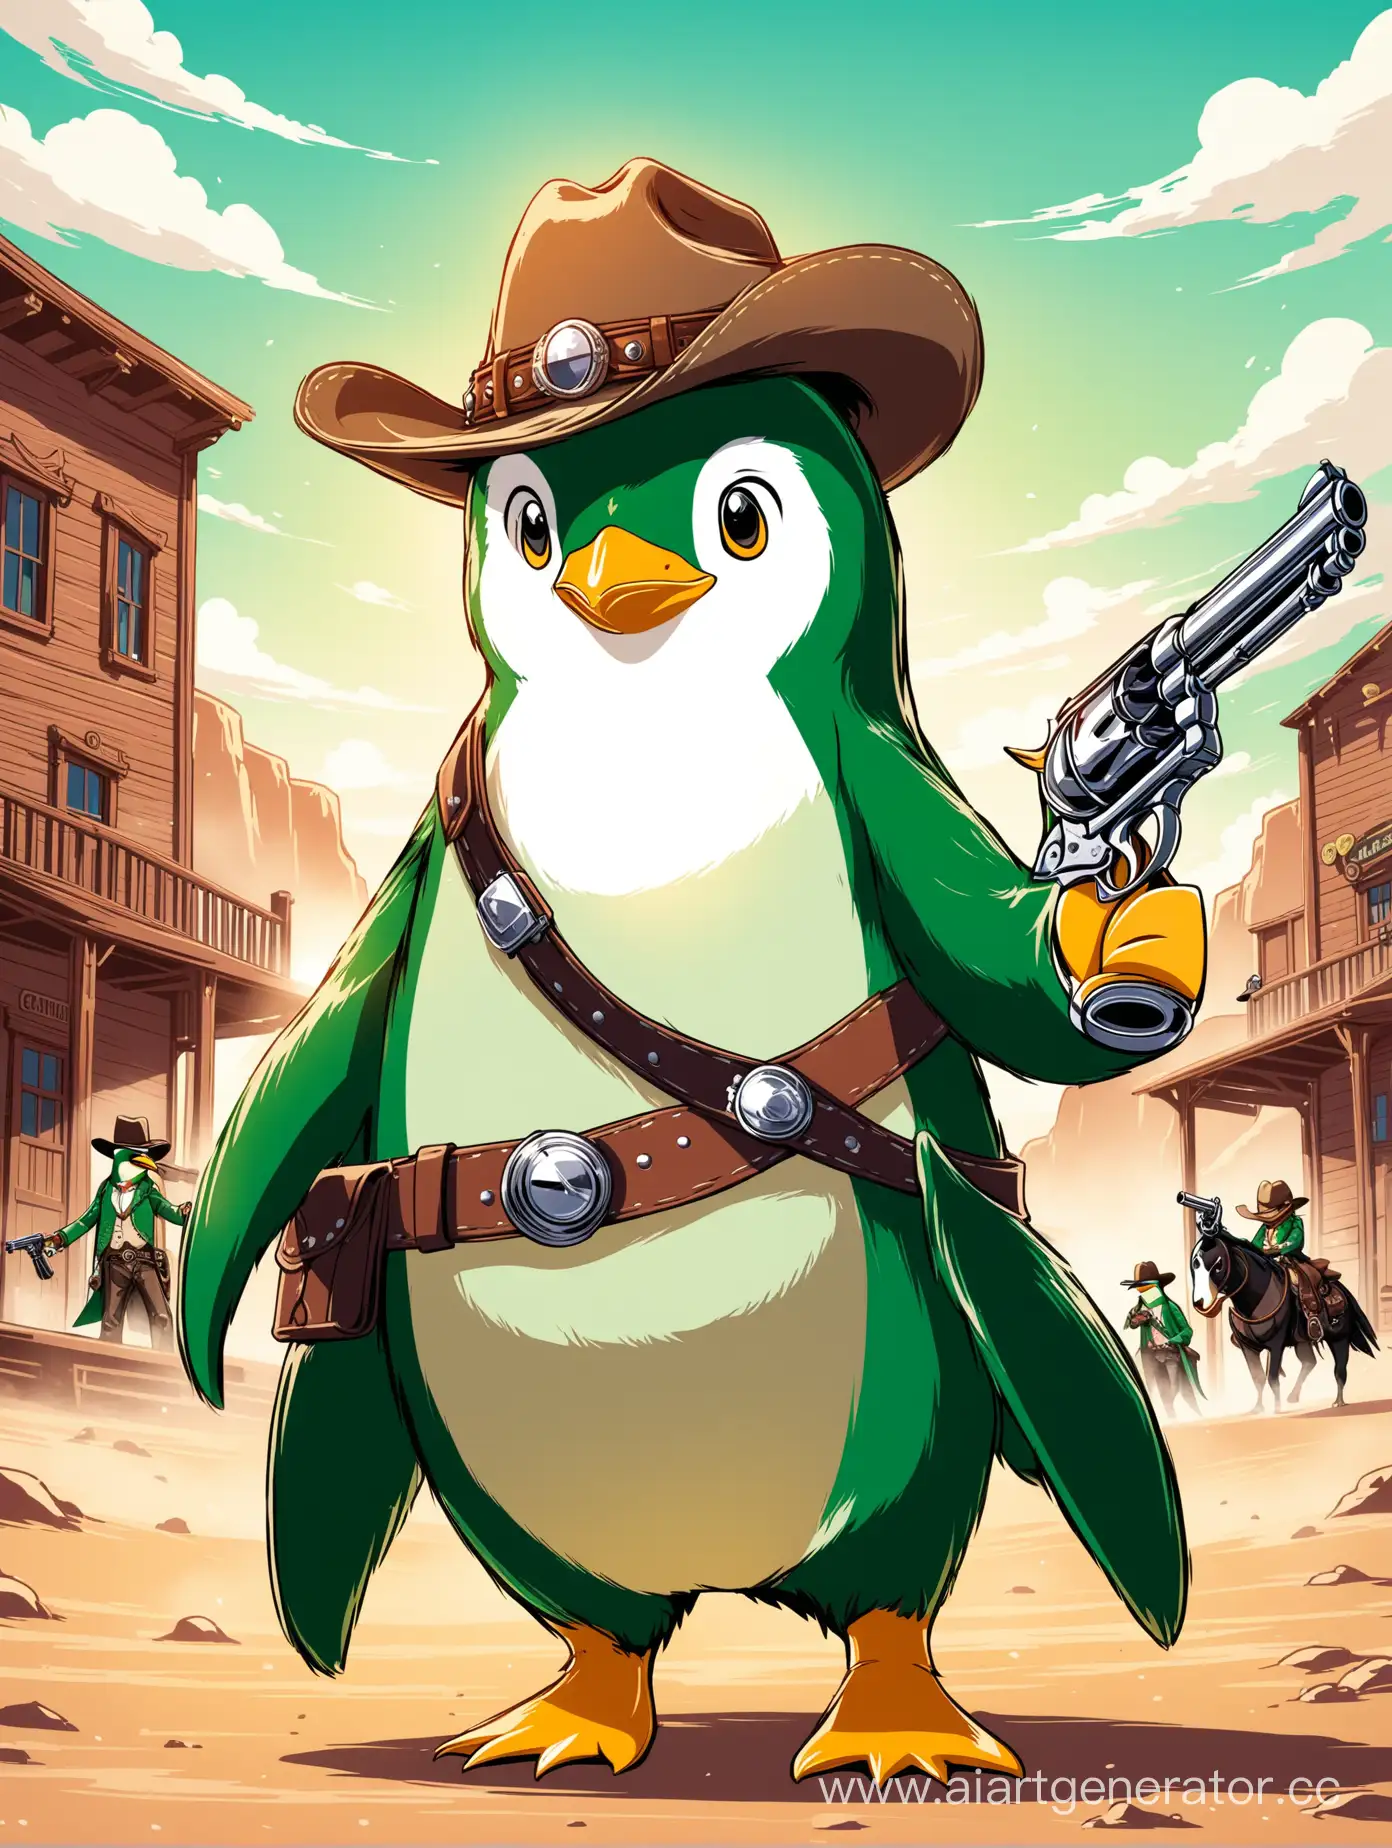 CowboyThemed-Green-Penguin-in-the-Wild-West